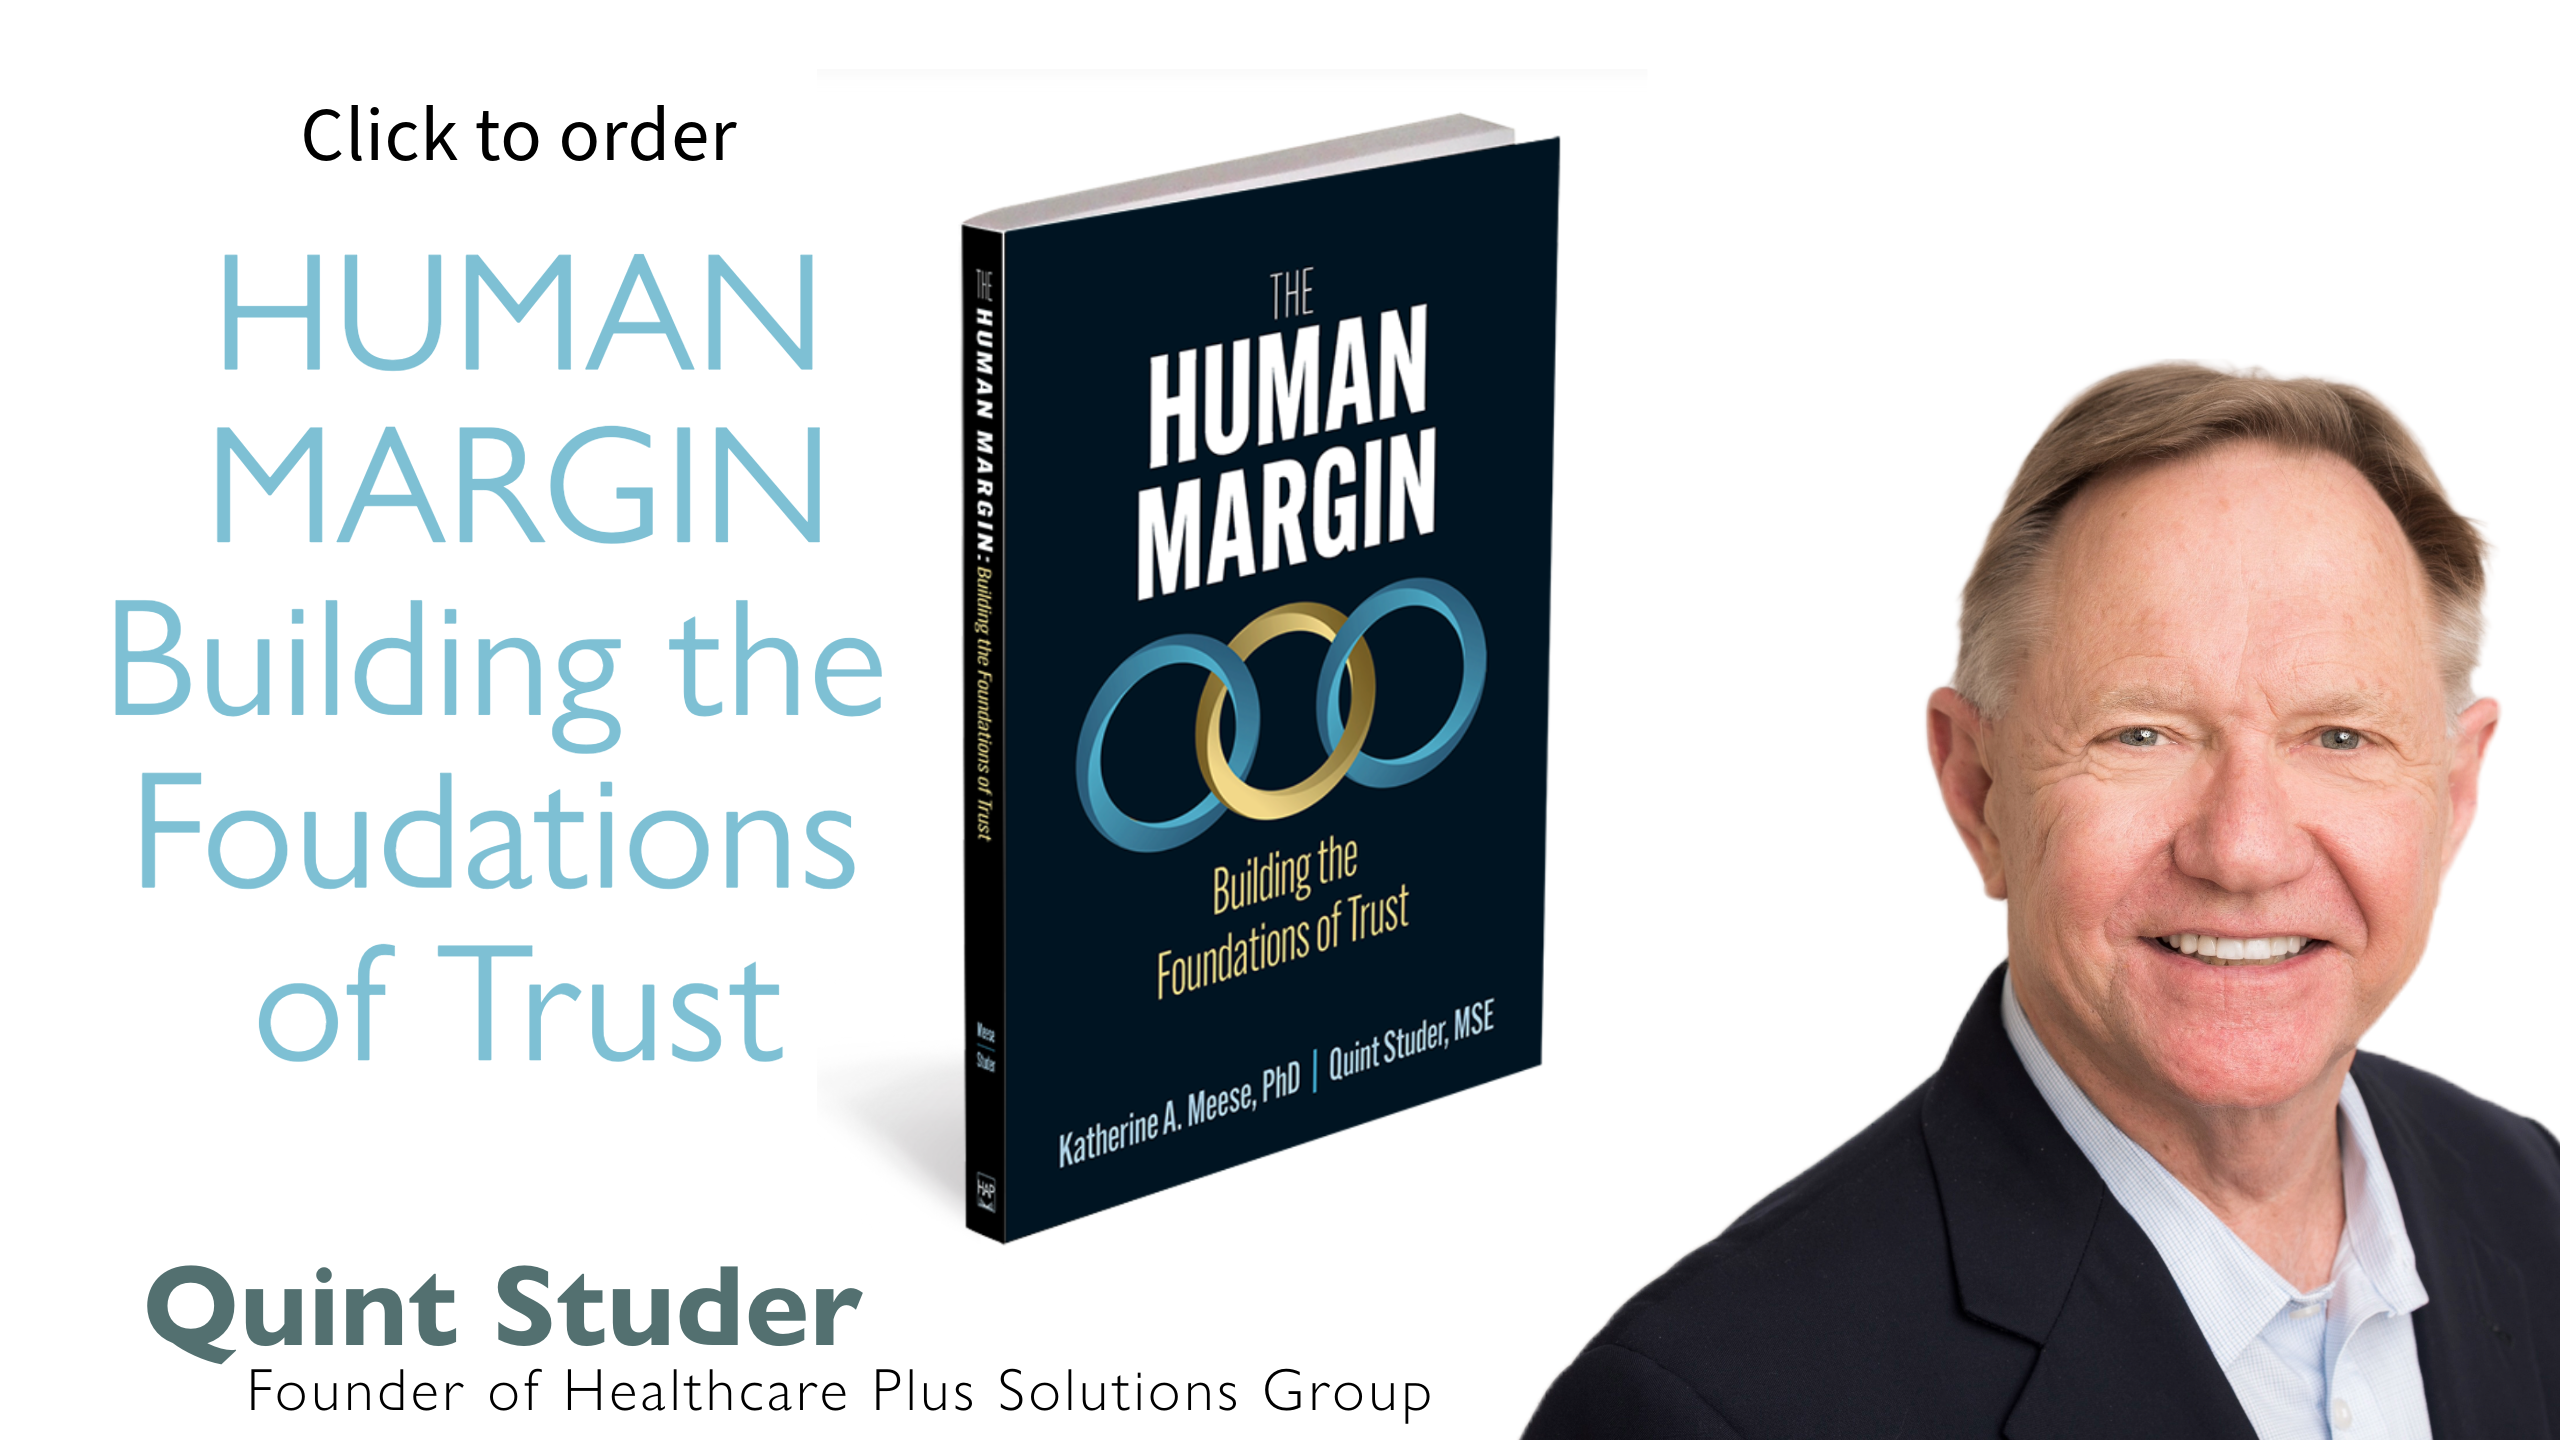 Human Margin building the foundations of Trust, by Quint Studer